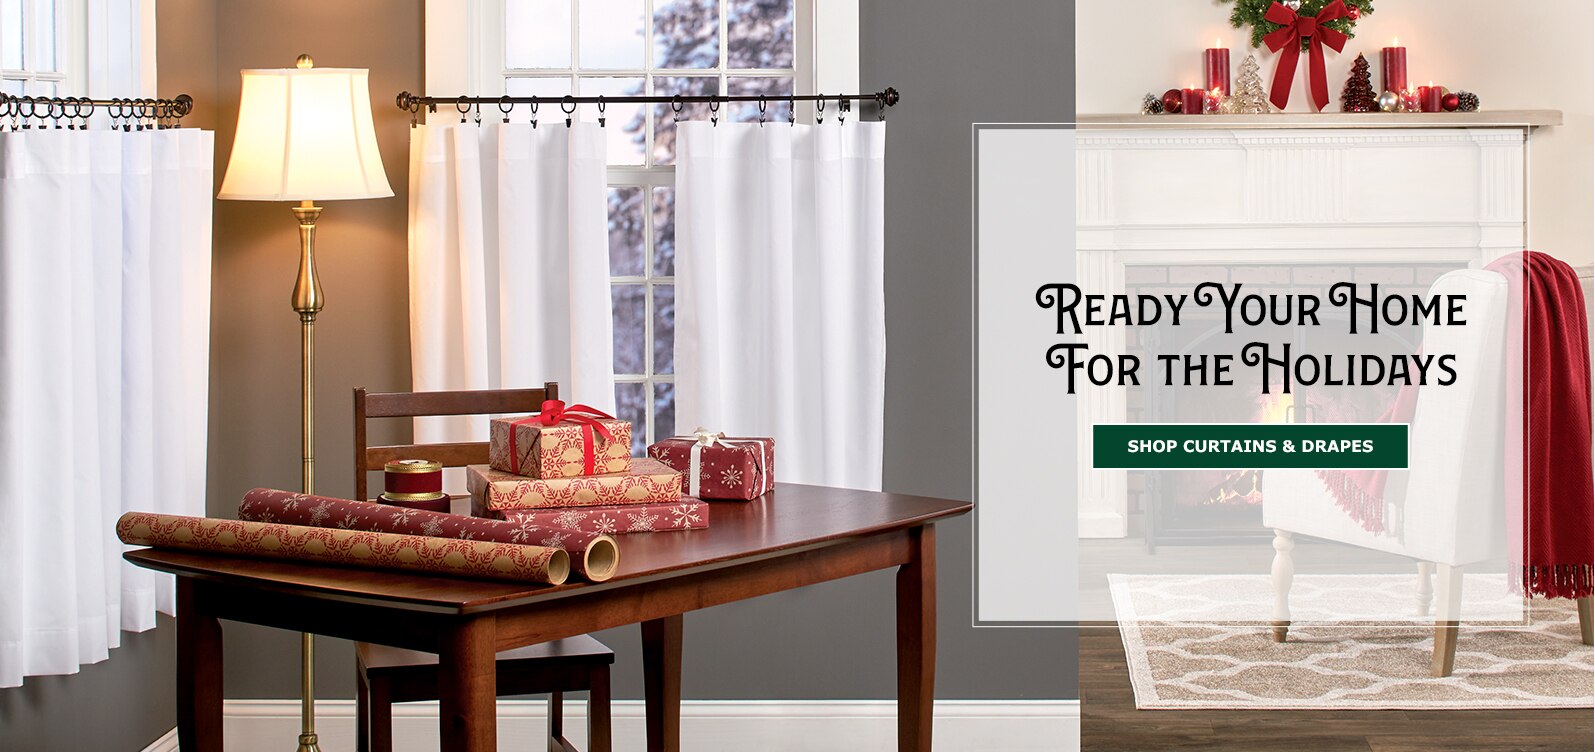 Ready Your Home For the Holidays. Shop Curtains & Drapes